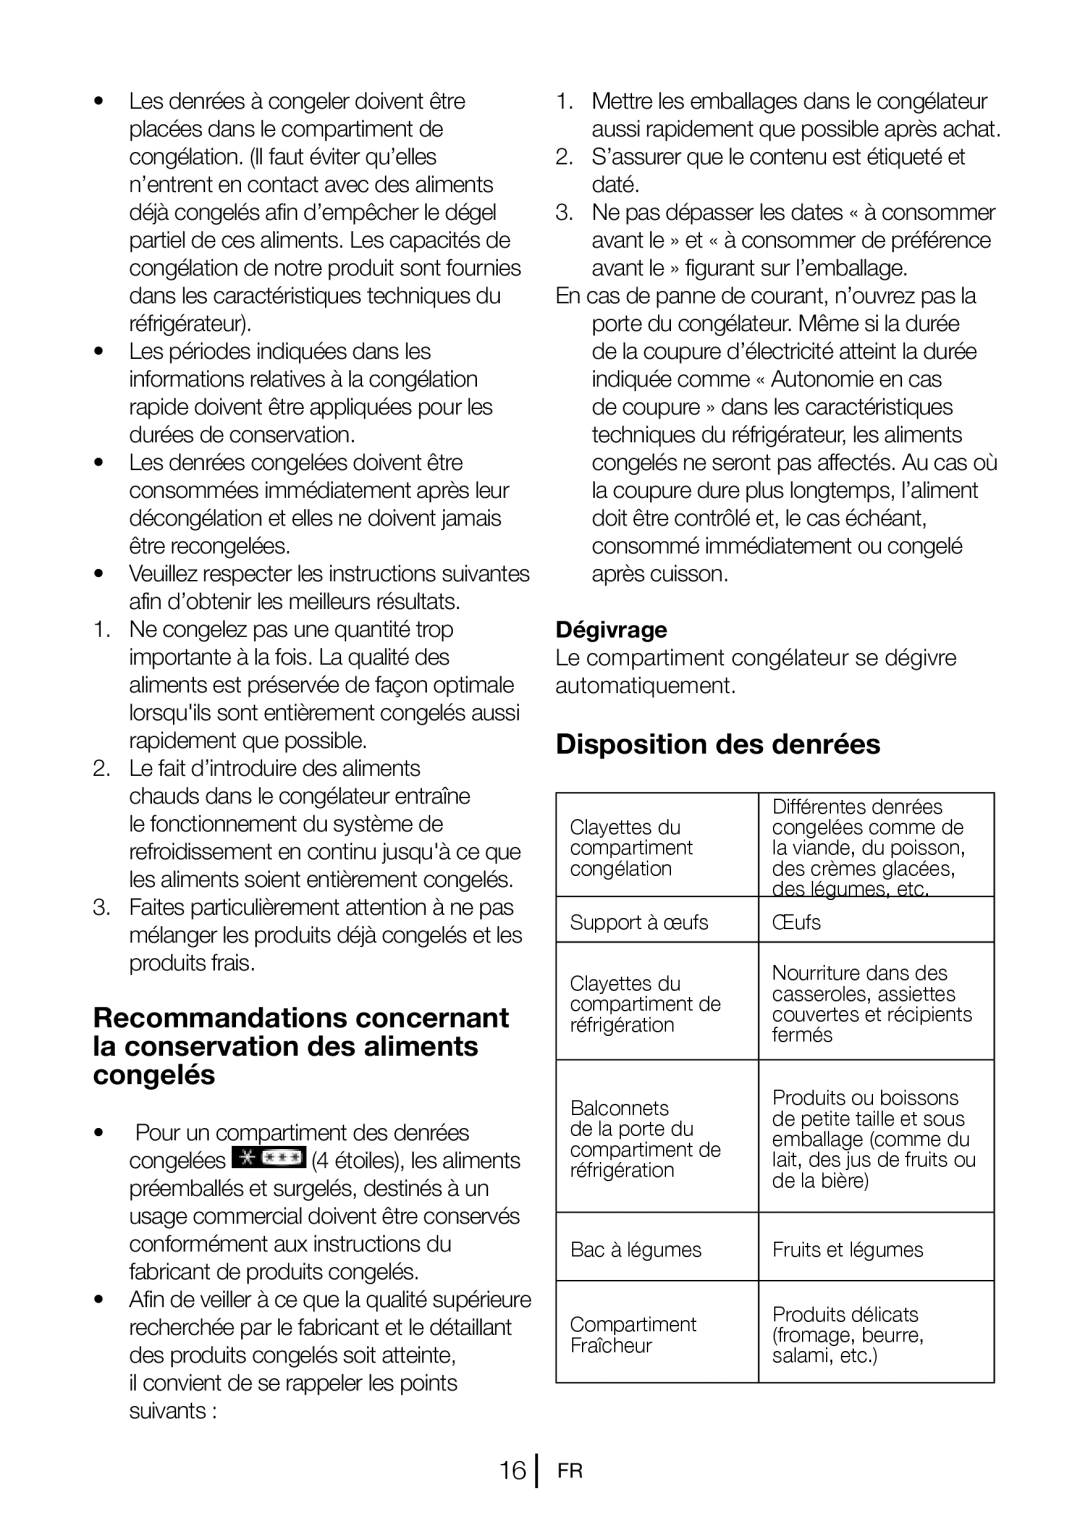 Blomberg KND 9651 XA+, KND 9651 A+ operating instructions Disposition des denrées, Dégivrage 